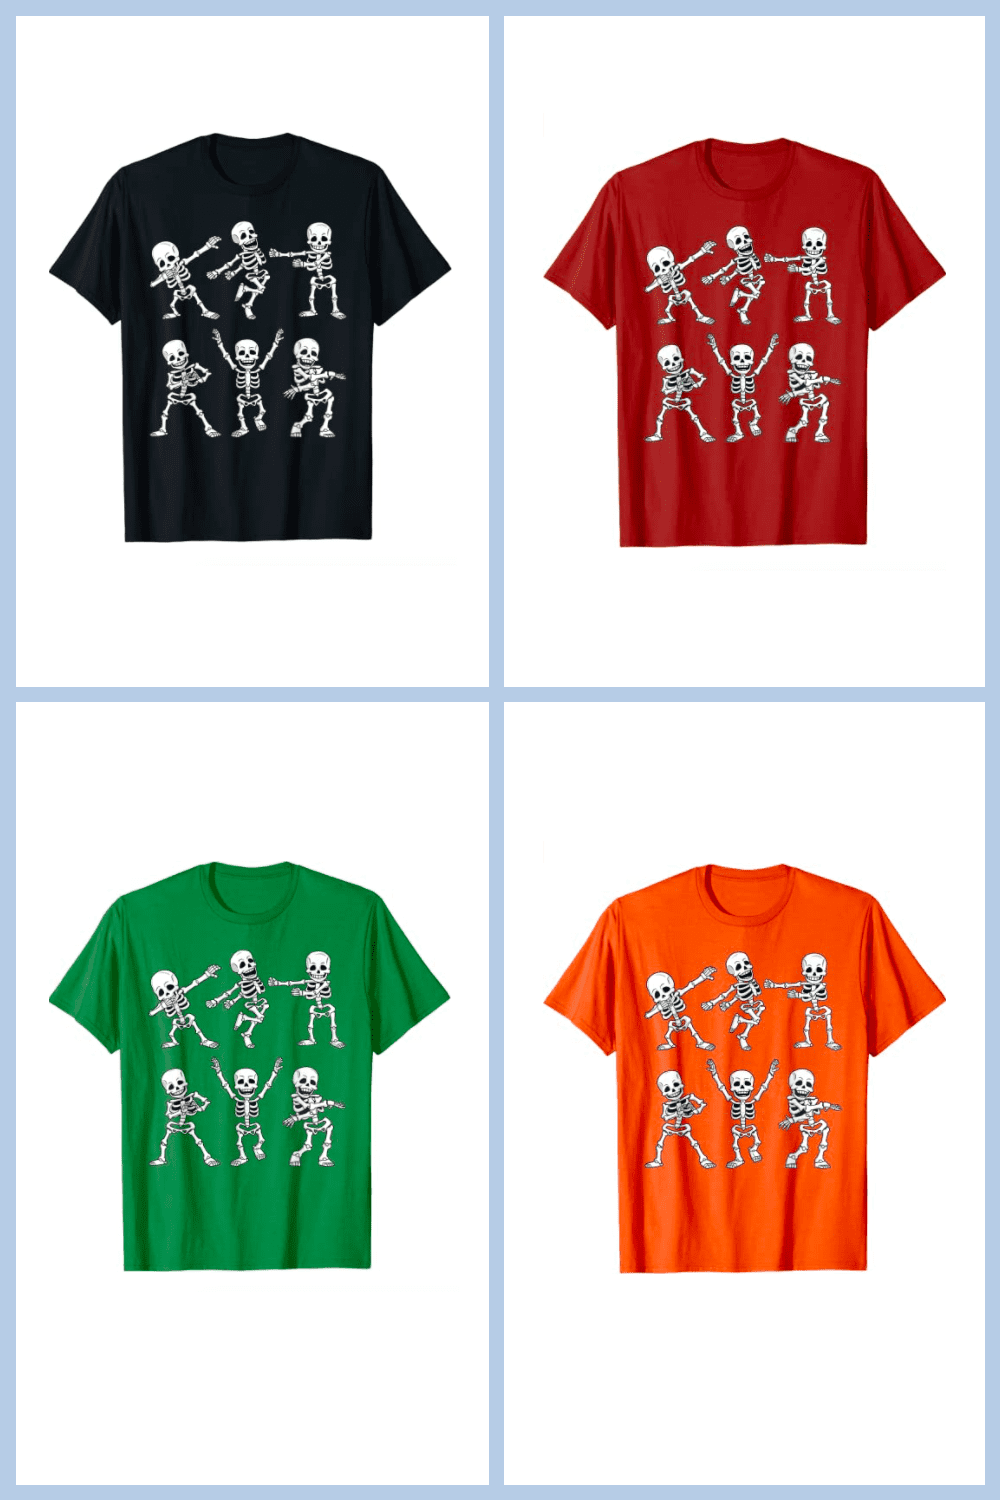 Little funny skeletons are dancing in colorful T-shirts.